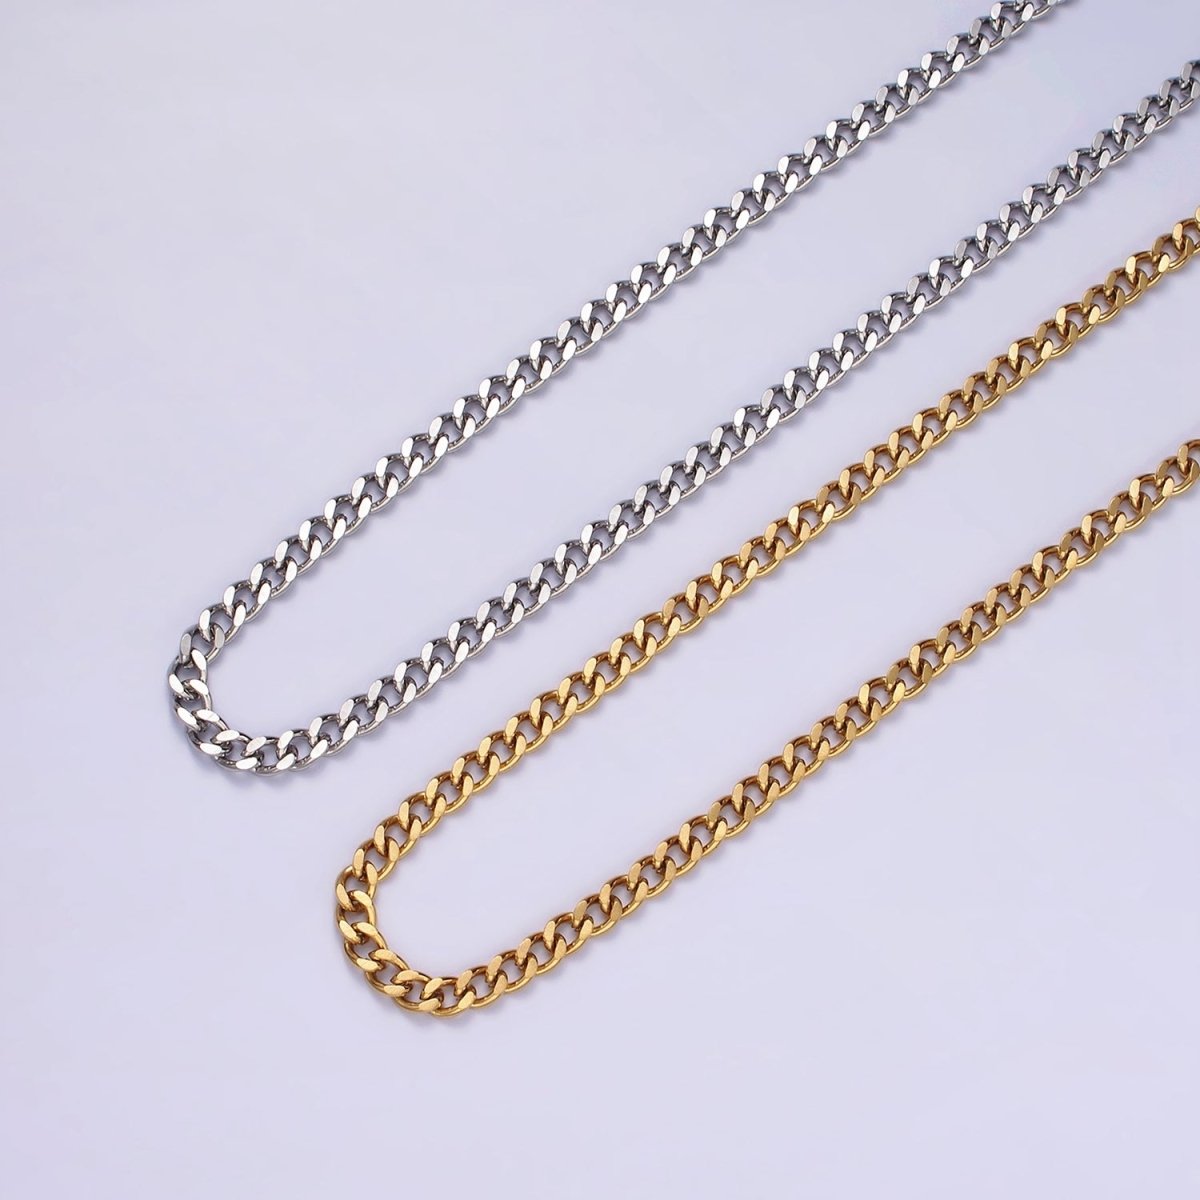 4mm Wide Stainless Steel Chain - 21.6", 23.6" Unisex Silver Cuban Link Chains Necklace | WA-2143 to WA-2146 Clearance Pricing - DLUXCA